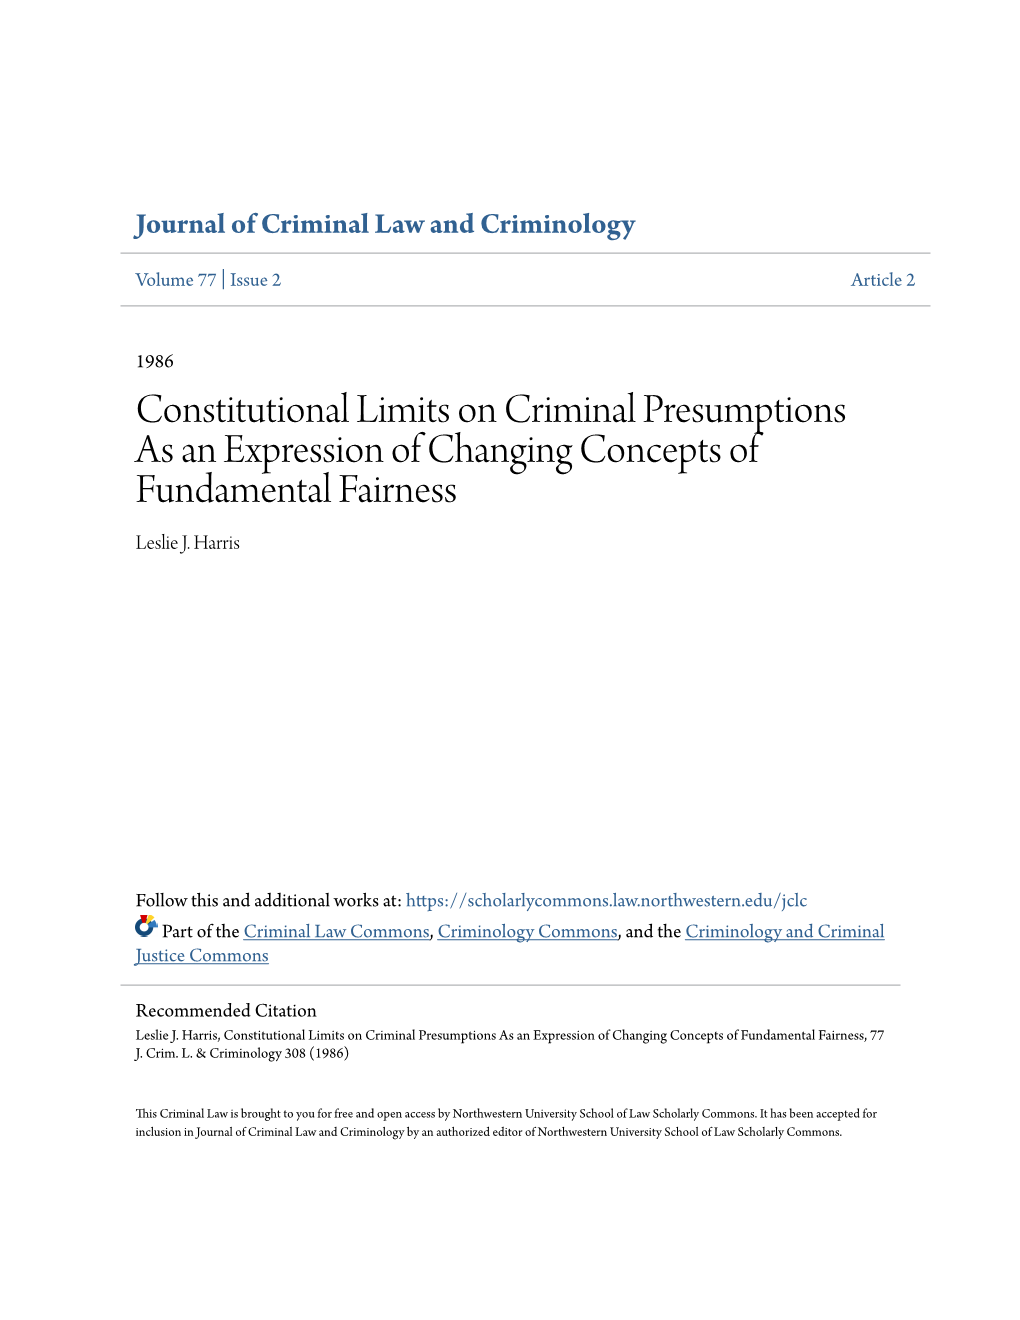 Constitutional Limits on Criminal Presumptions As an Expression of Changing Concepts of Fundamental Fairness Leslie J